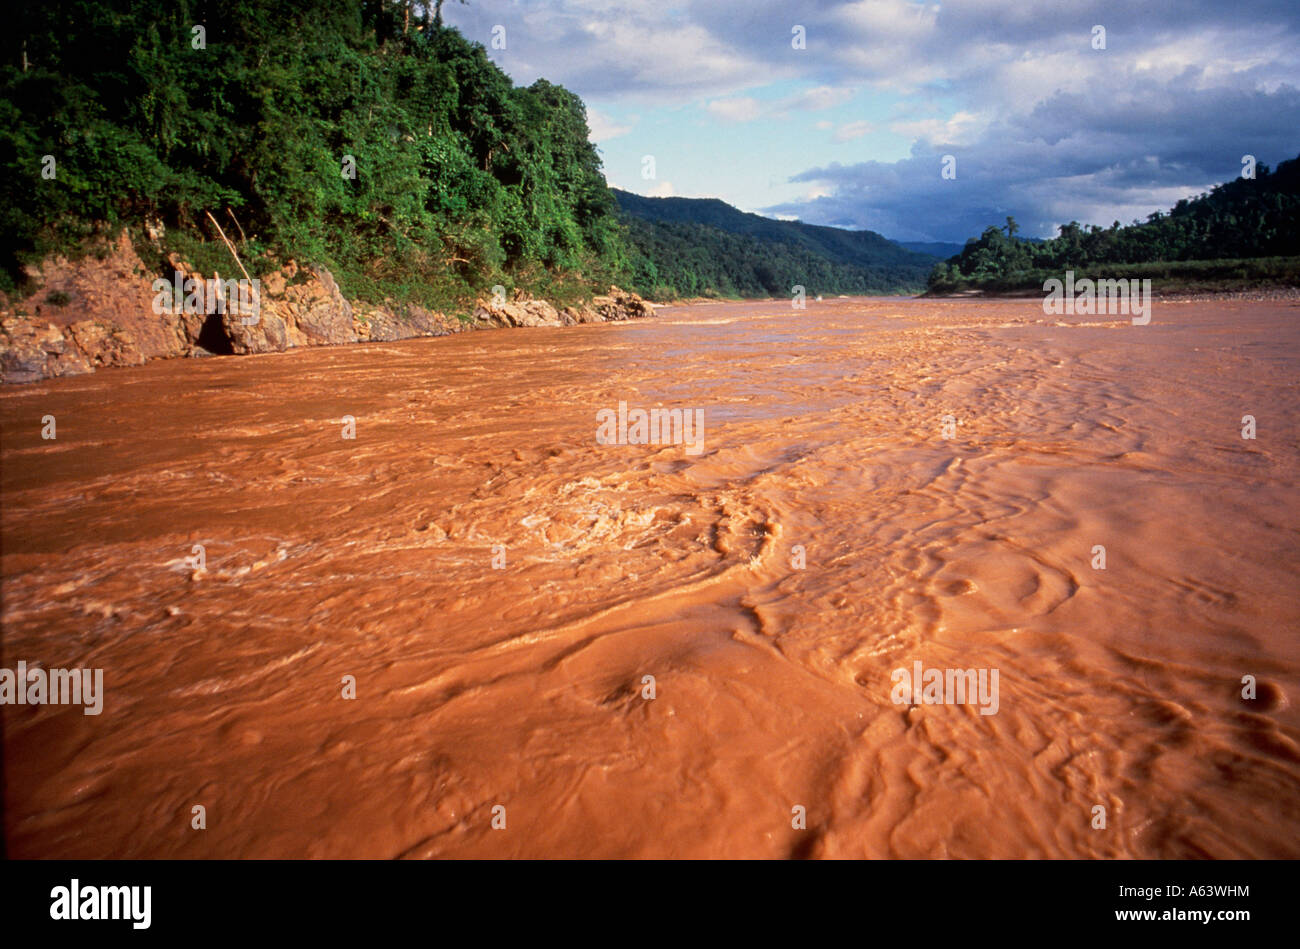 mekong river near village of chiang saen region of the golden triangle thailand Stock Photo